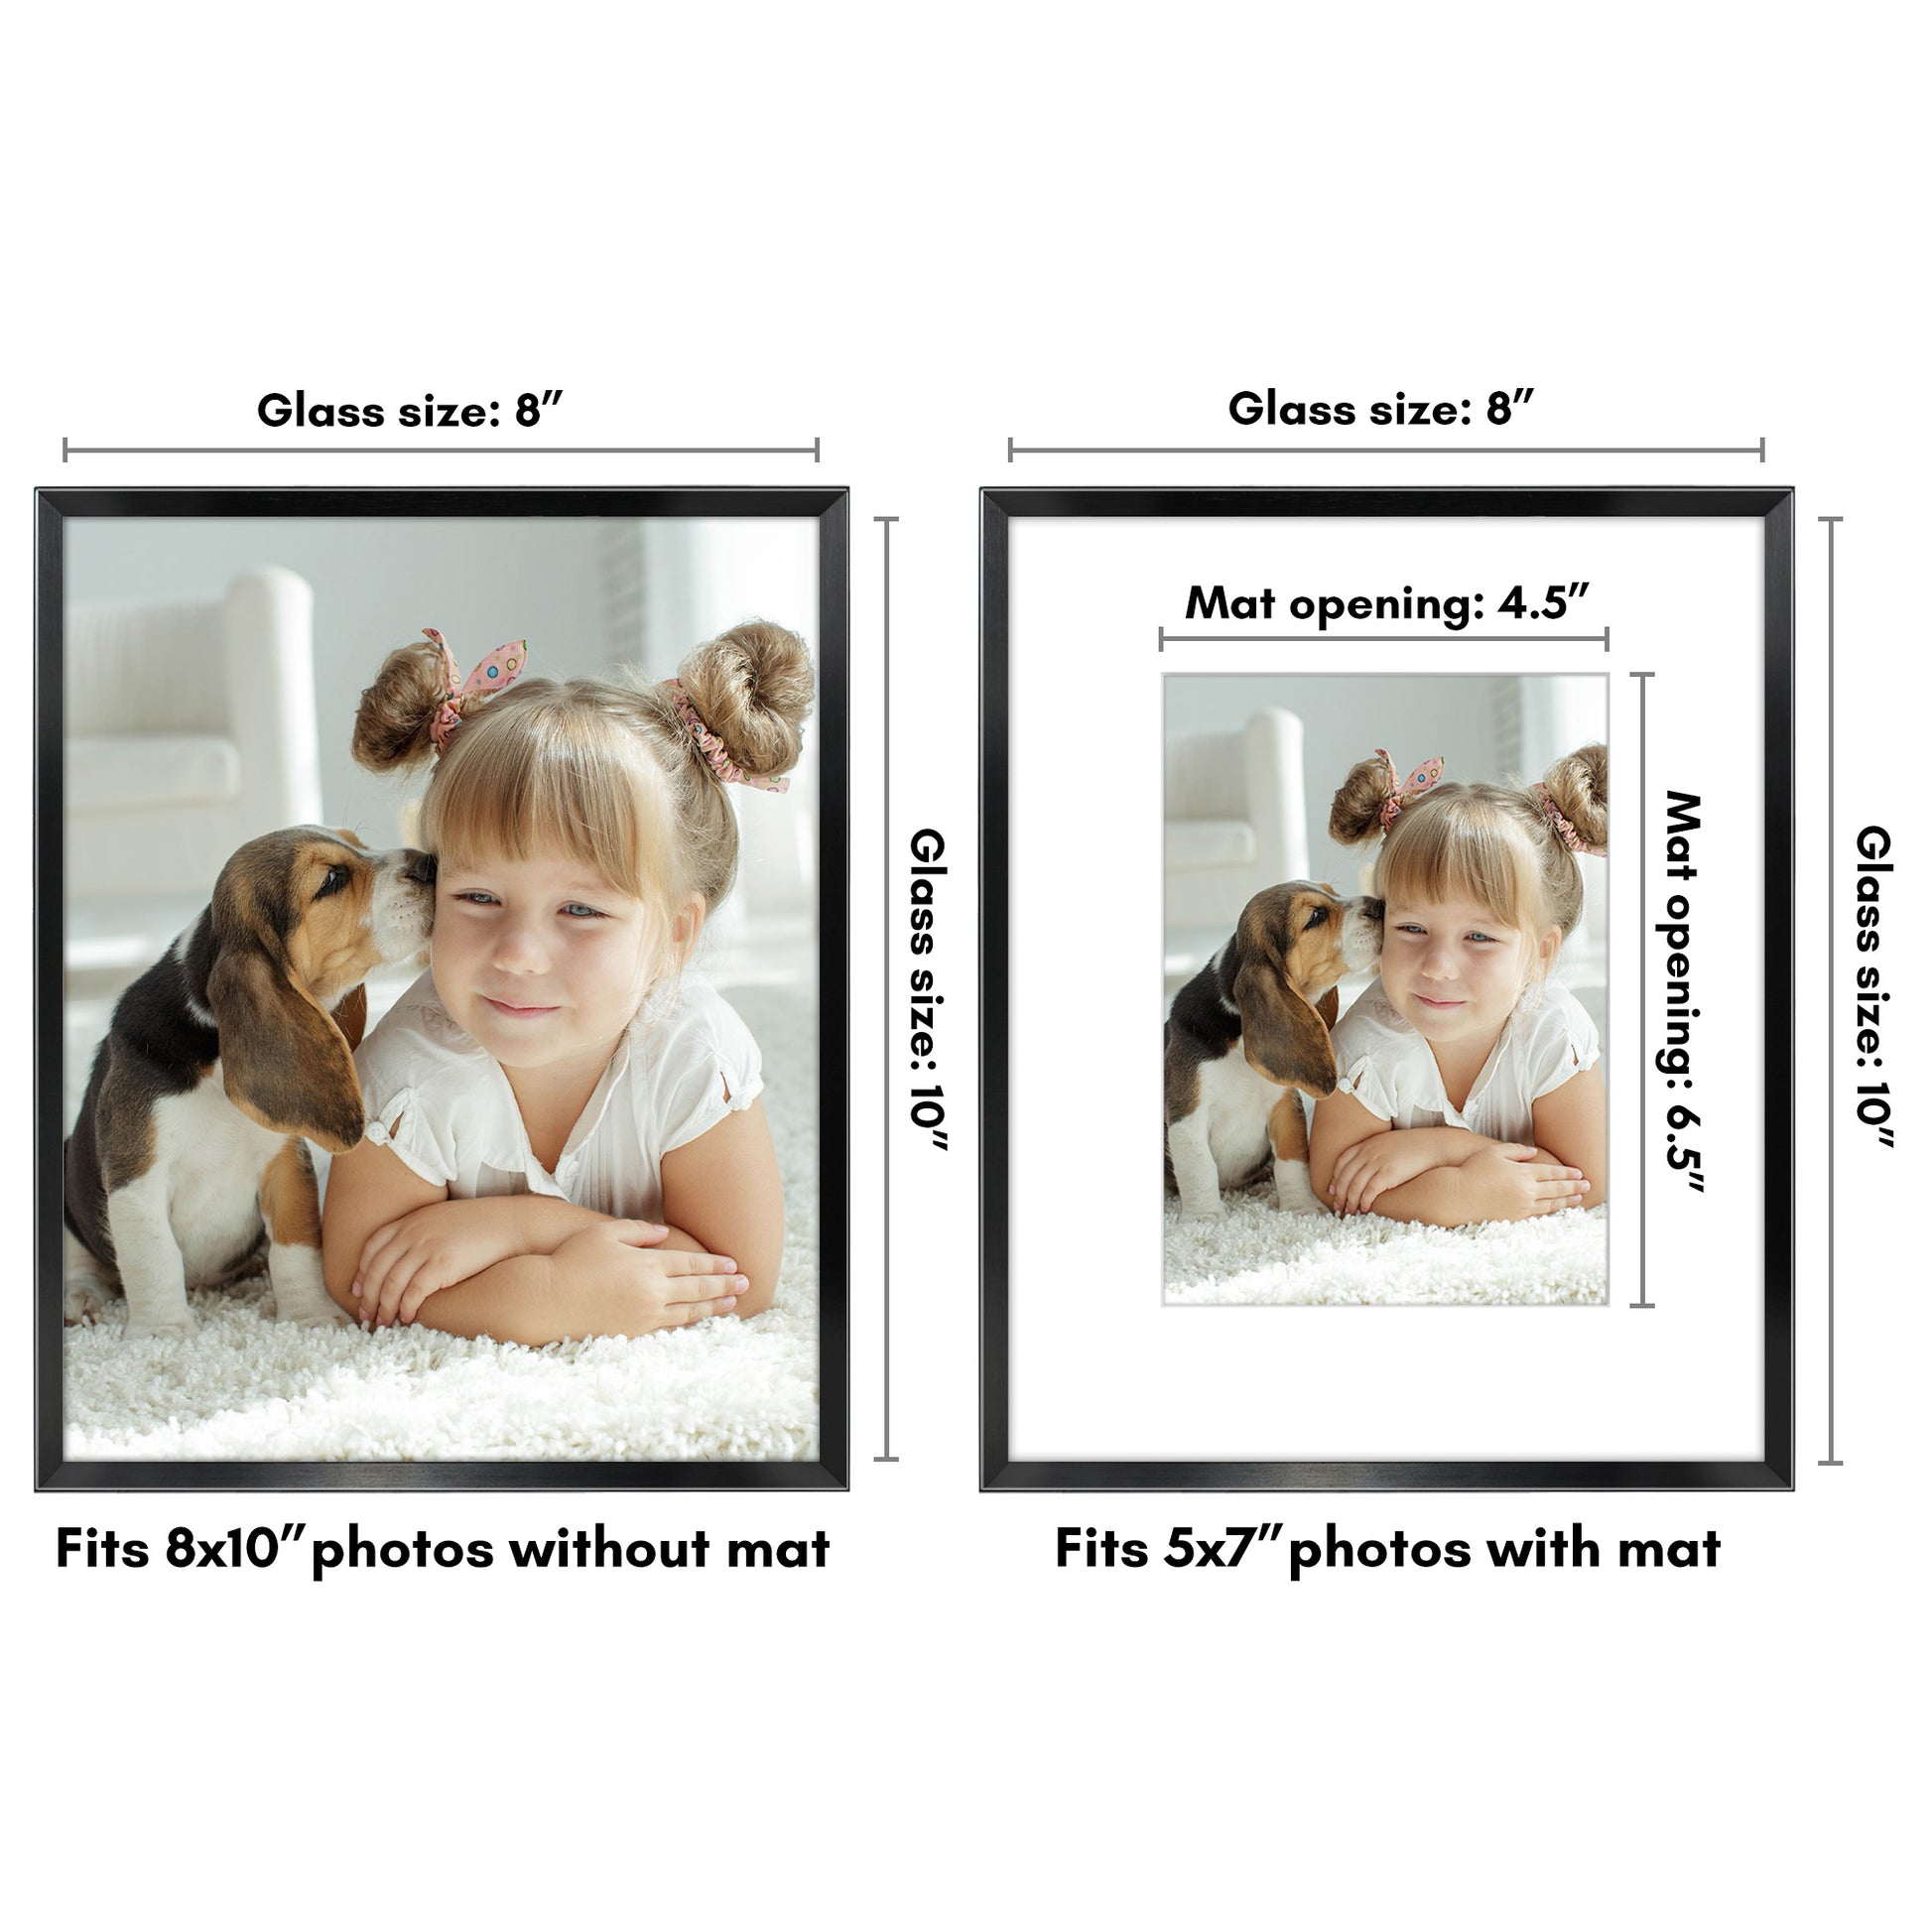 Americanflat 8x10 Picture Frame in White - Displays 5x7 with Mat and 8x10 Without Mat - Set of 5 Frames - Sawtooth Hanging Hardware